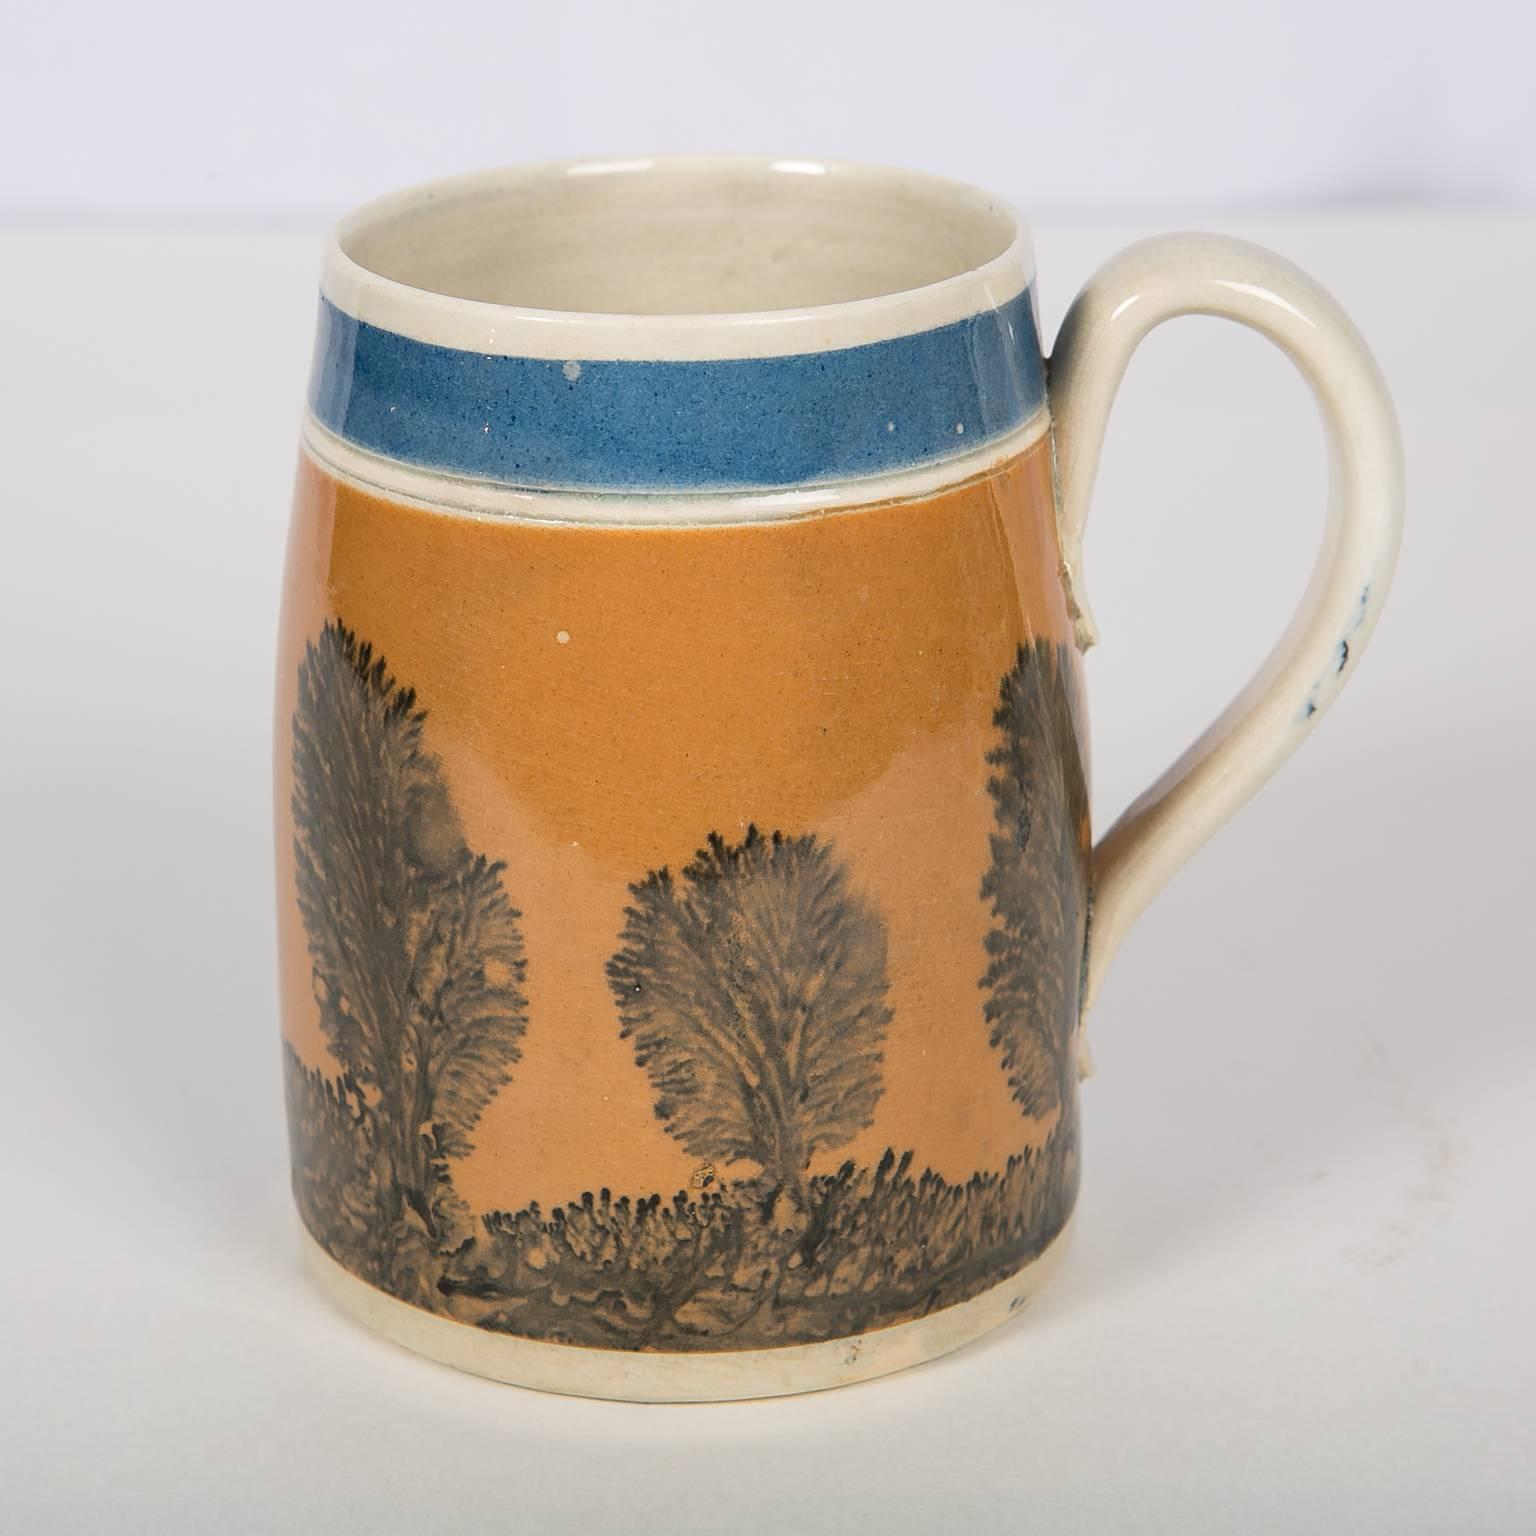 Antique Mochaware Mug Decorated with 